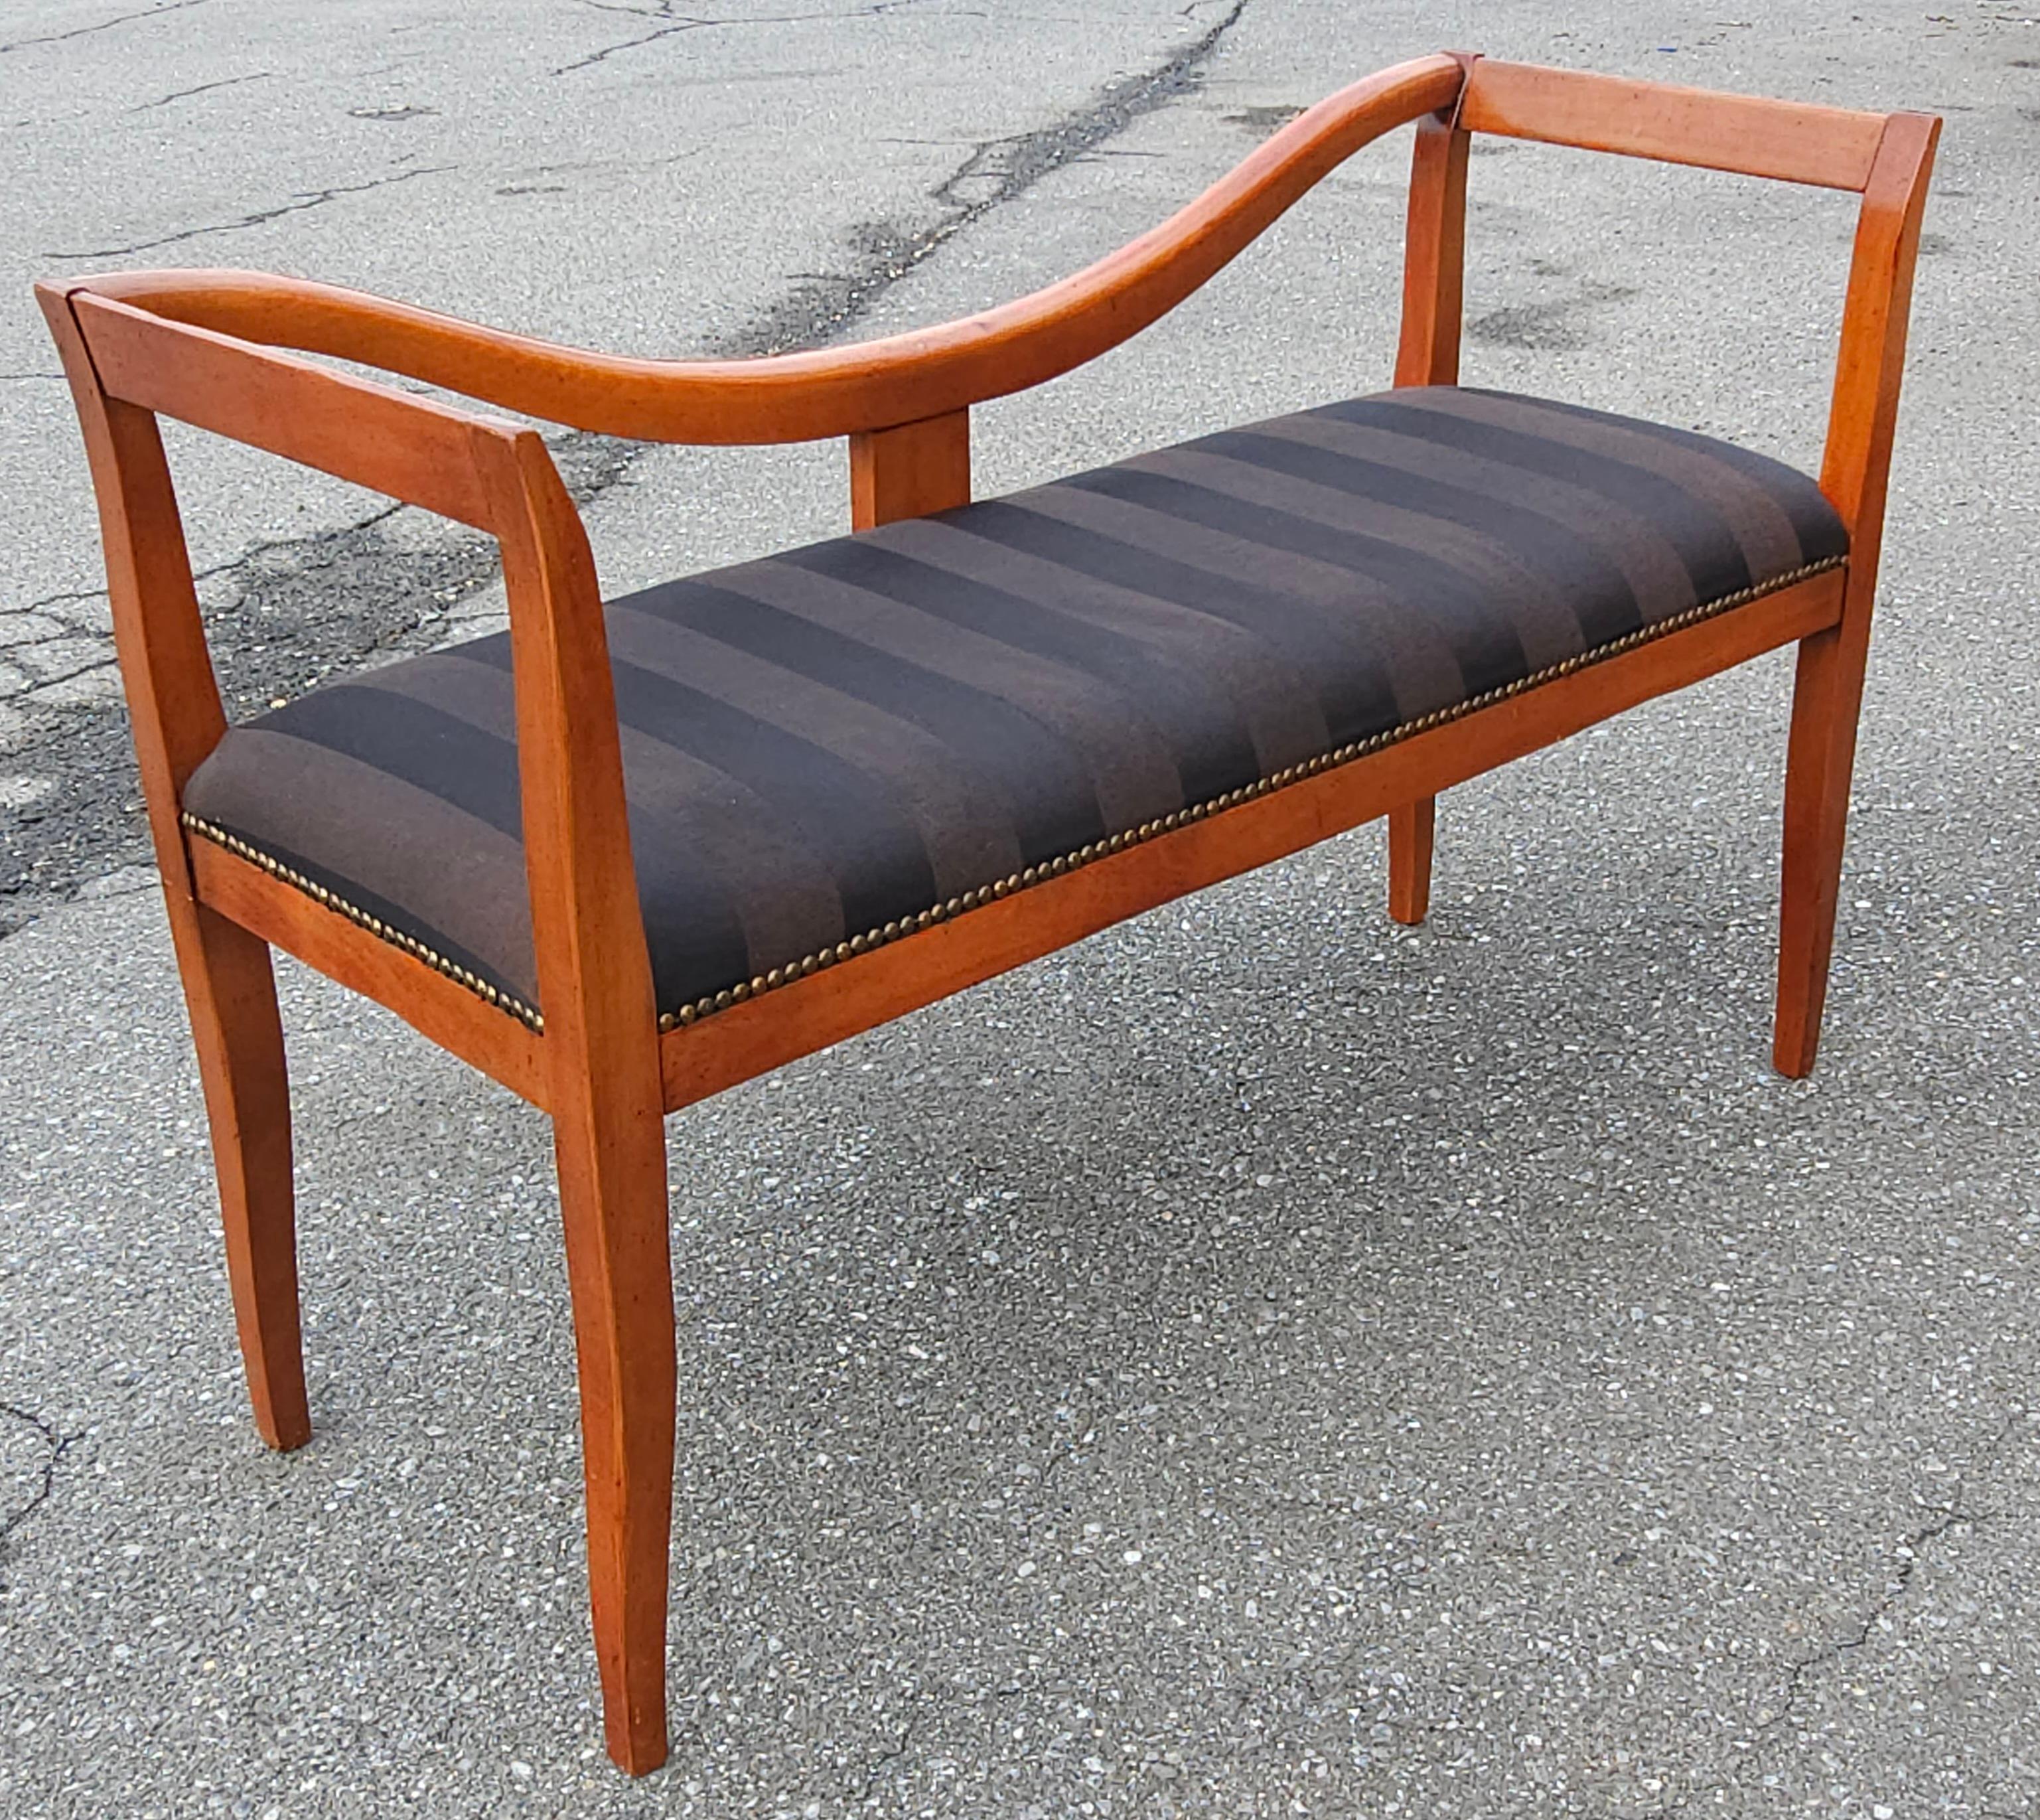 A Late 20th C. Italian Lacquered Solid Cherry and Upholstered Bench Settee with nail head trim  in great vintage condition. Measures 44